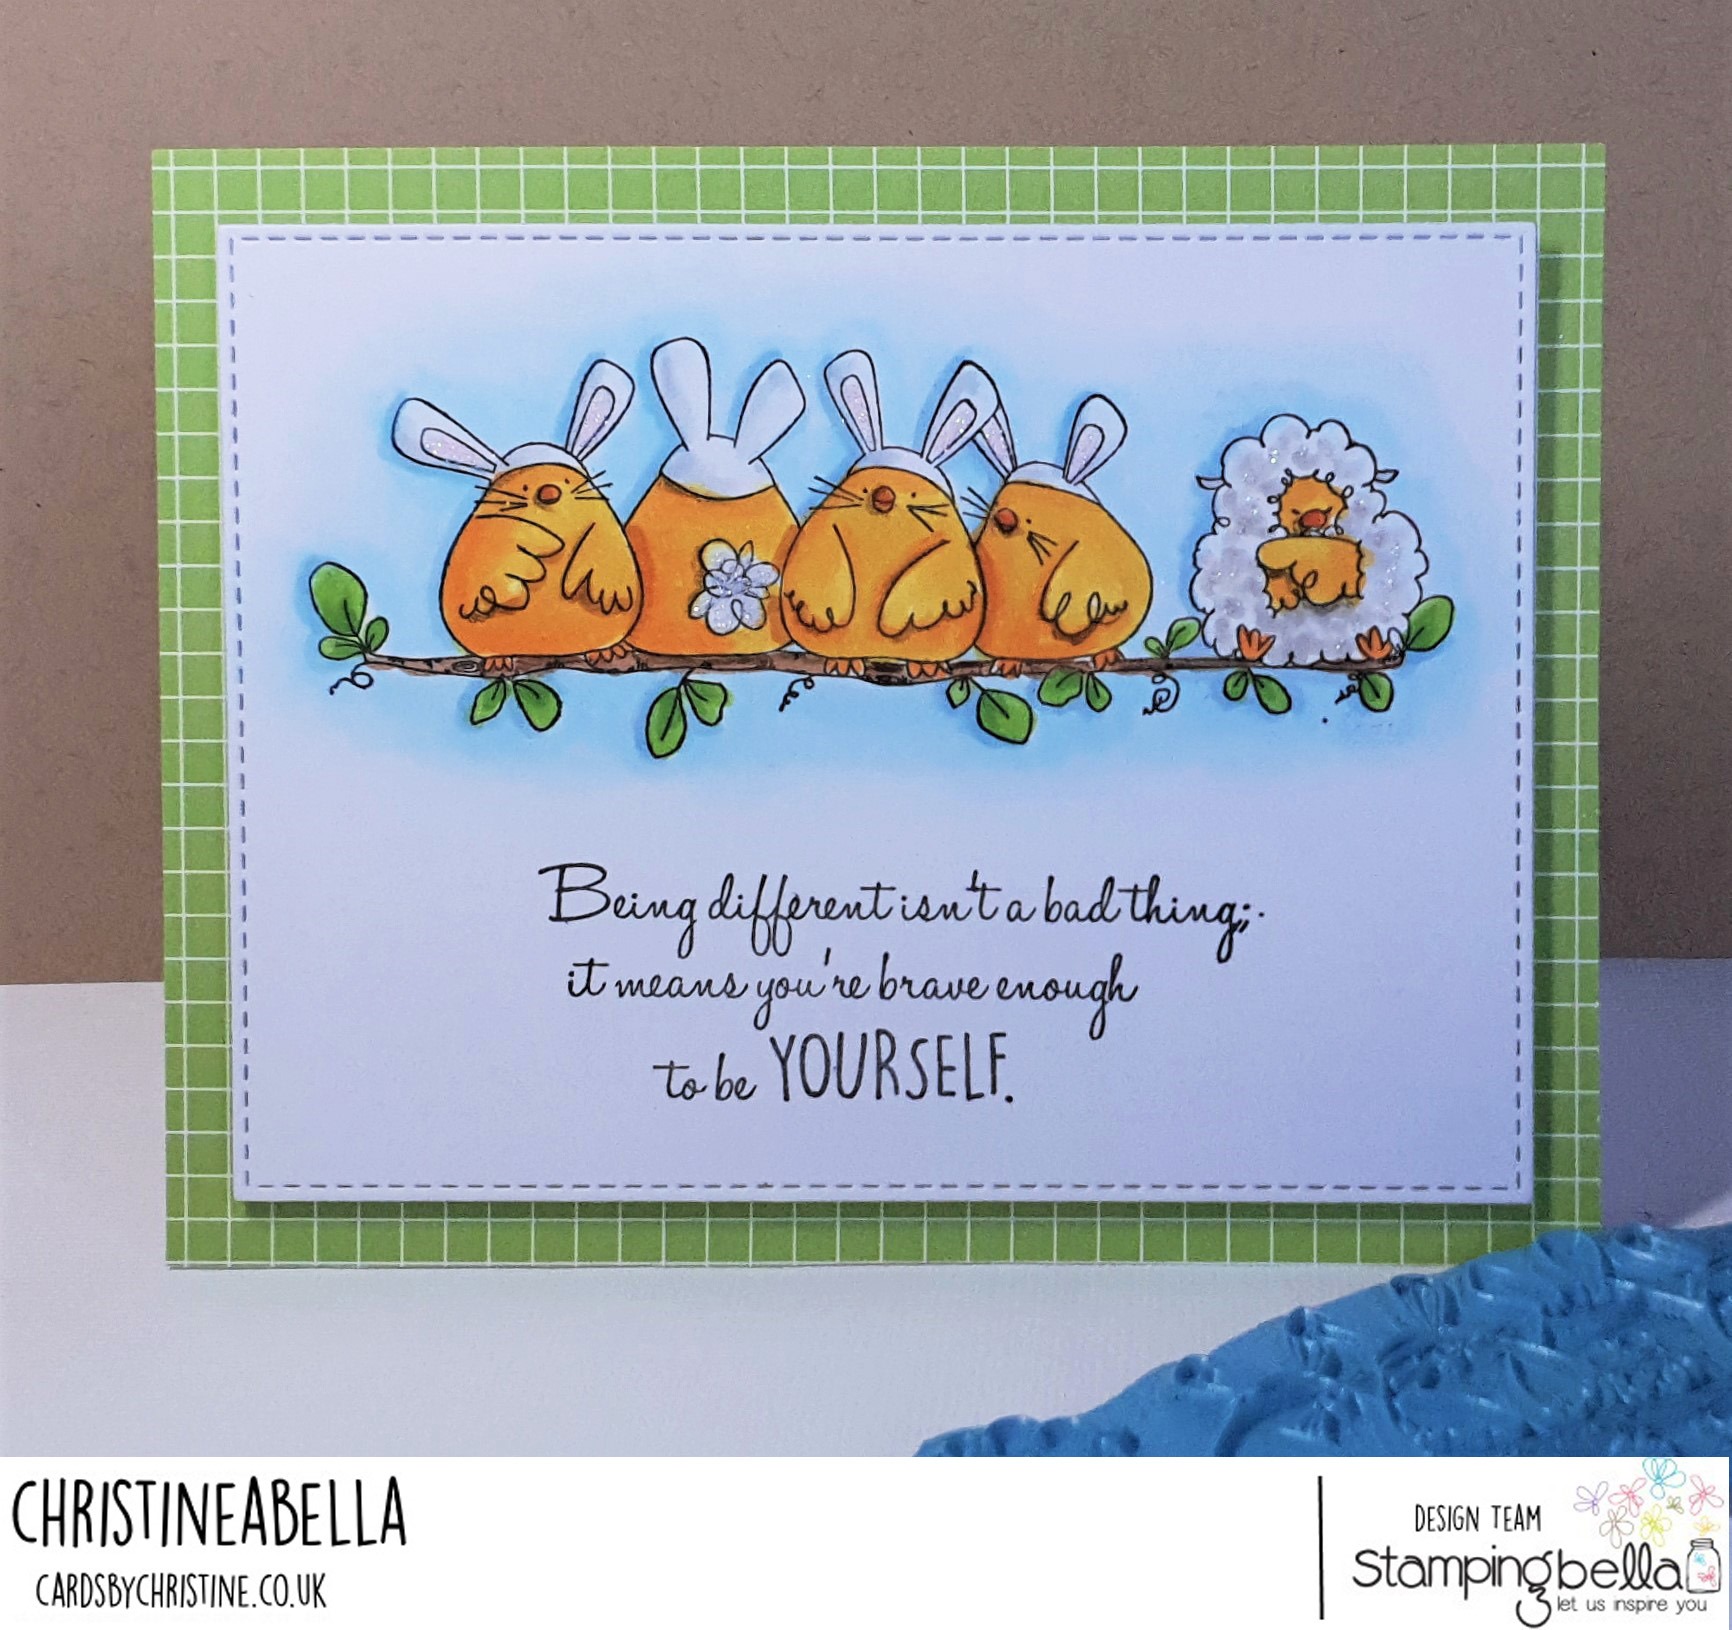 www.stampingbella.com: rubber stamp used: THE CHICK WHO WAS A LAMB. card by Christine Levison